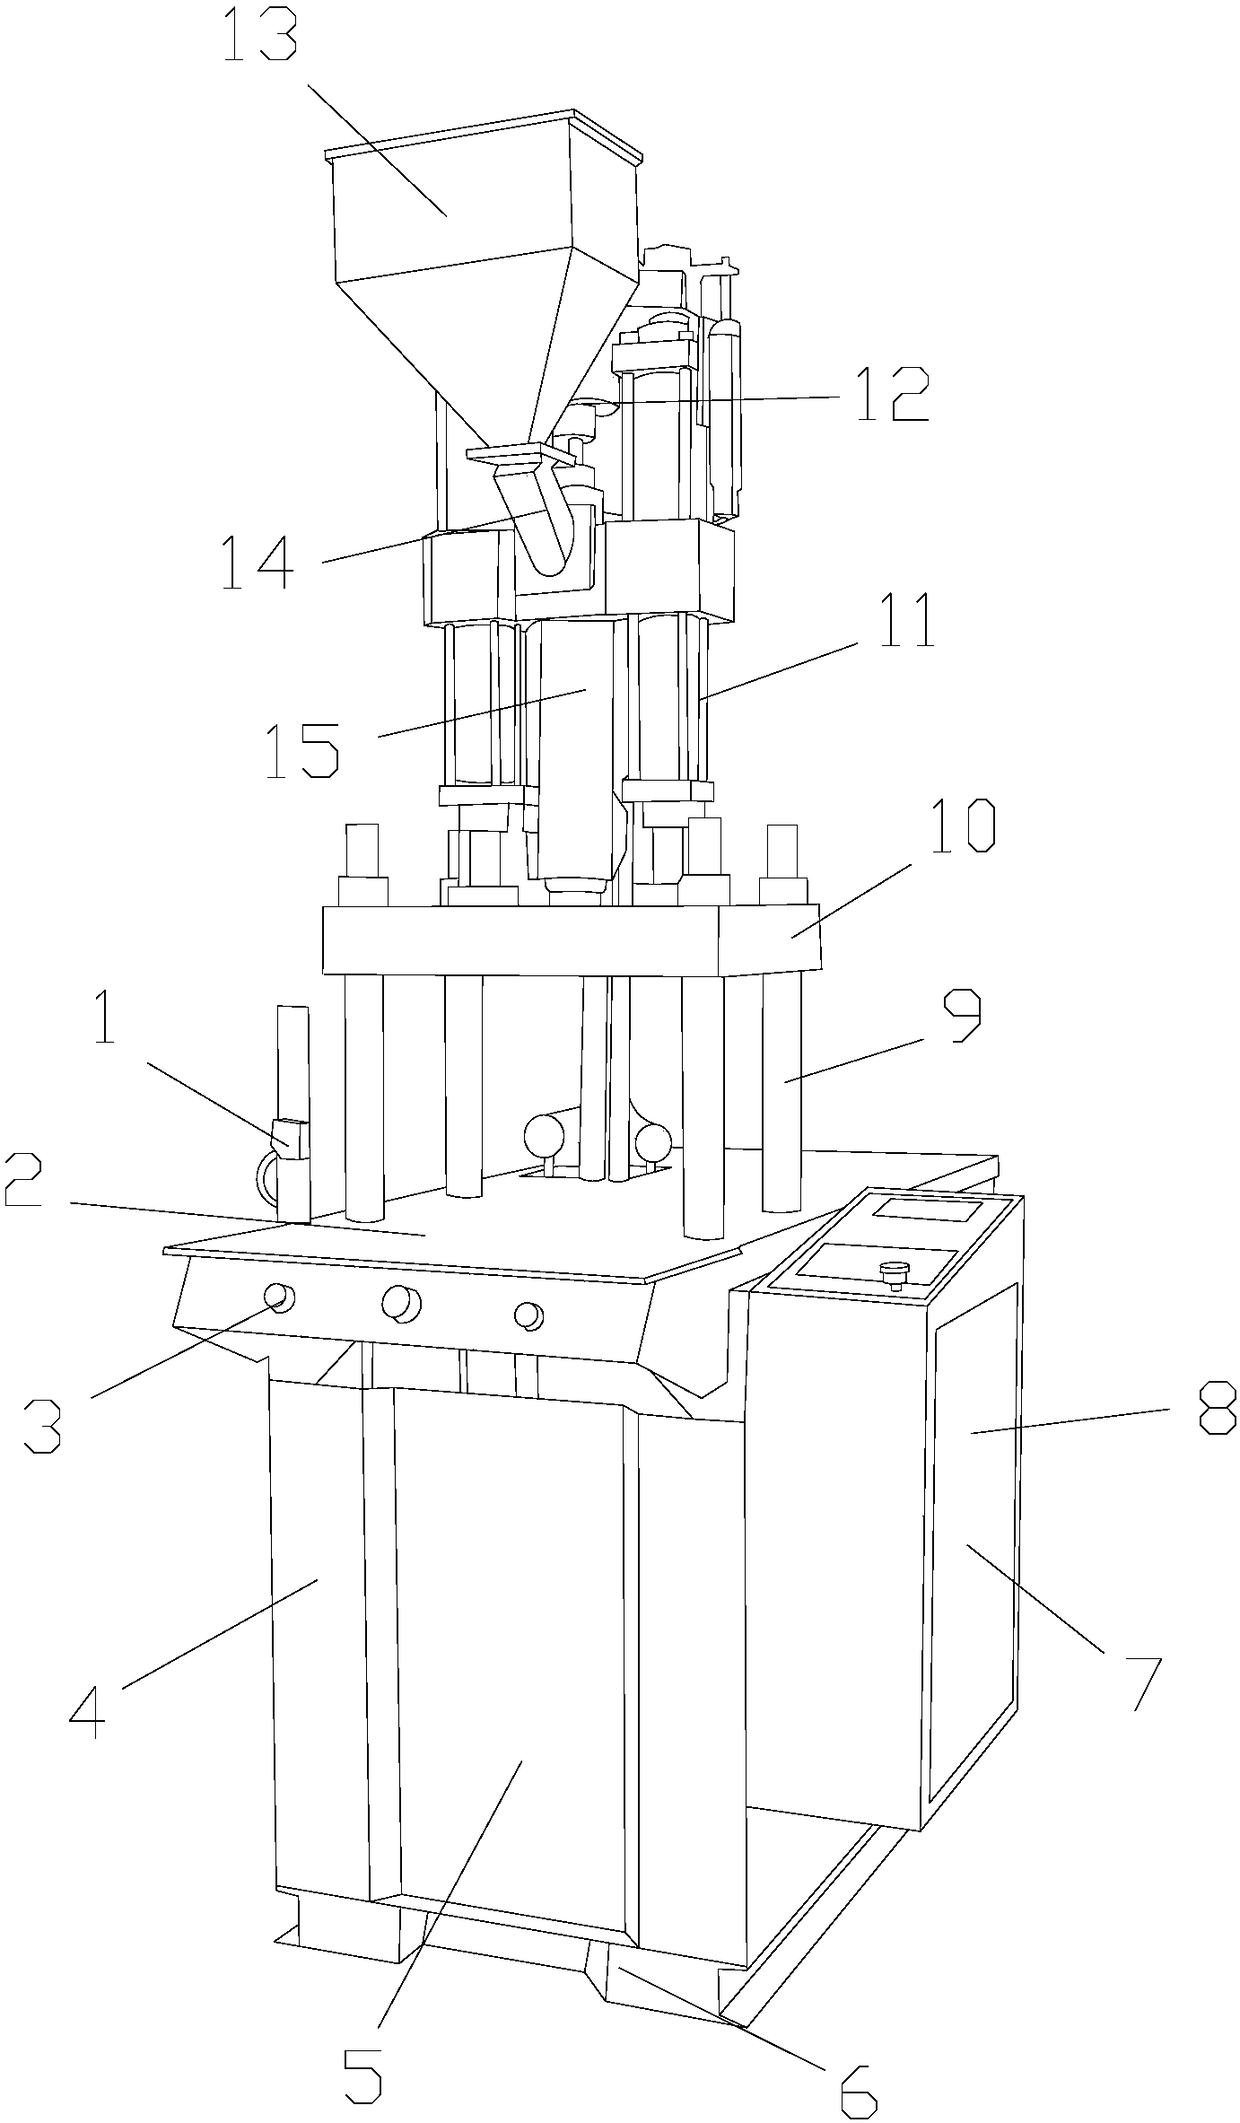 Positioning device applied to numerical control injection molding machine for zipper